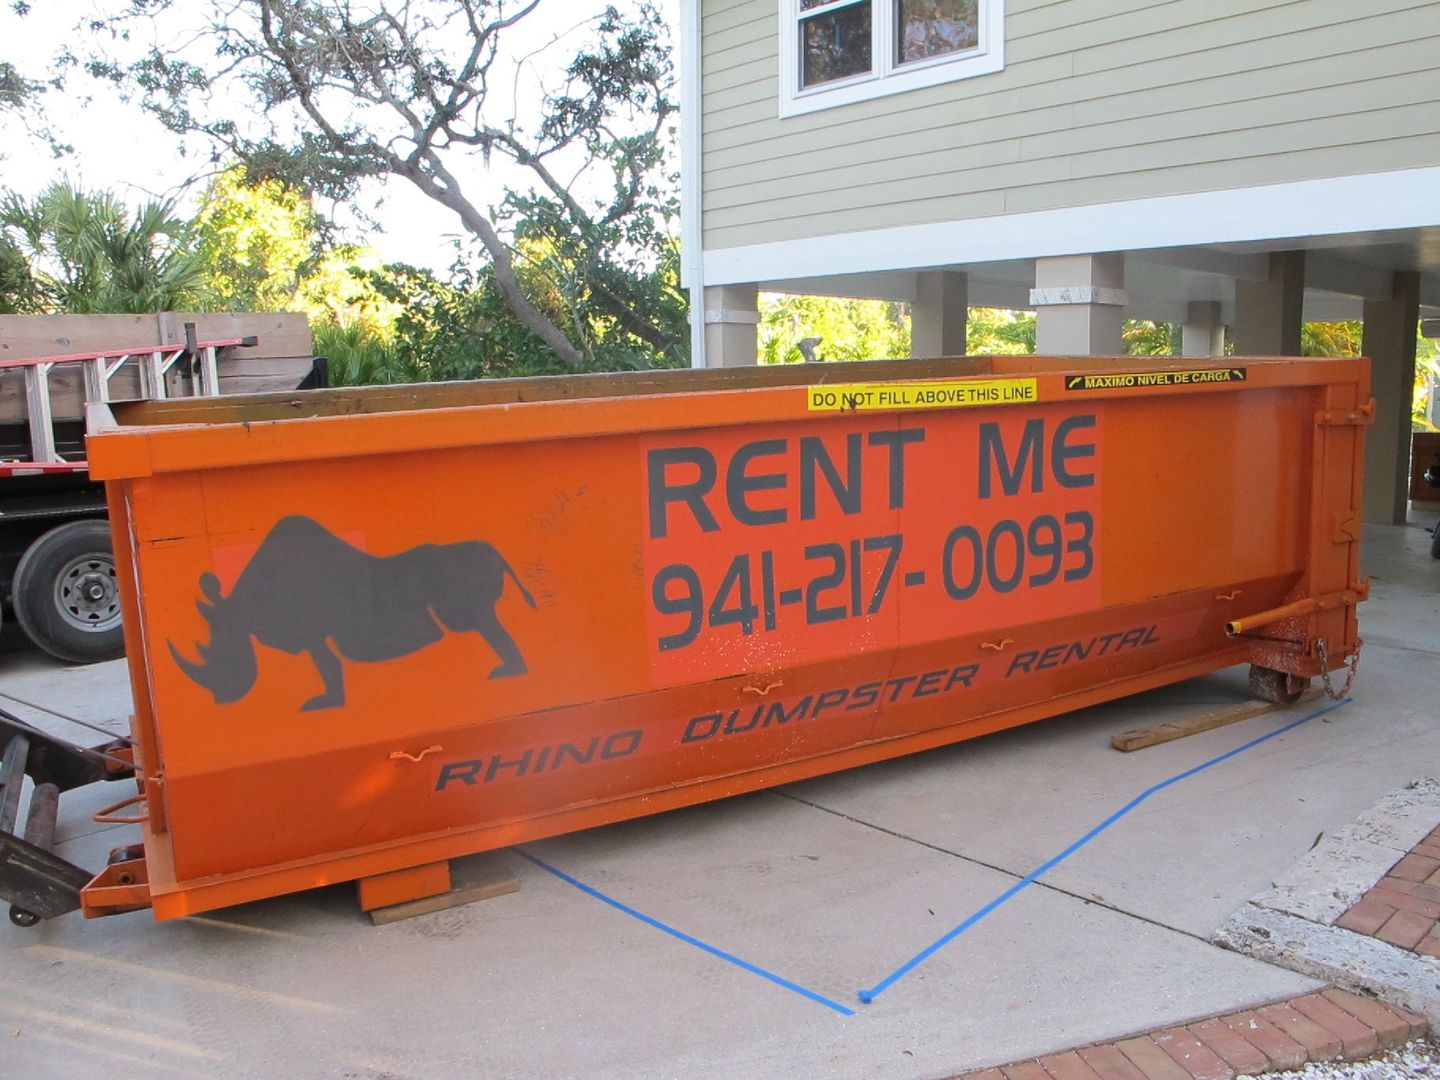 Two orange dumpsters are parked in front of a house.